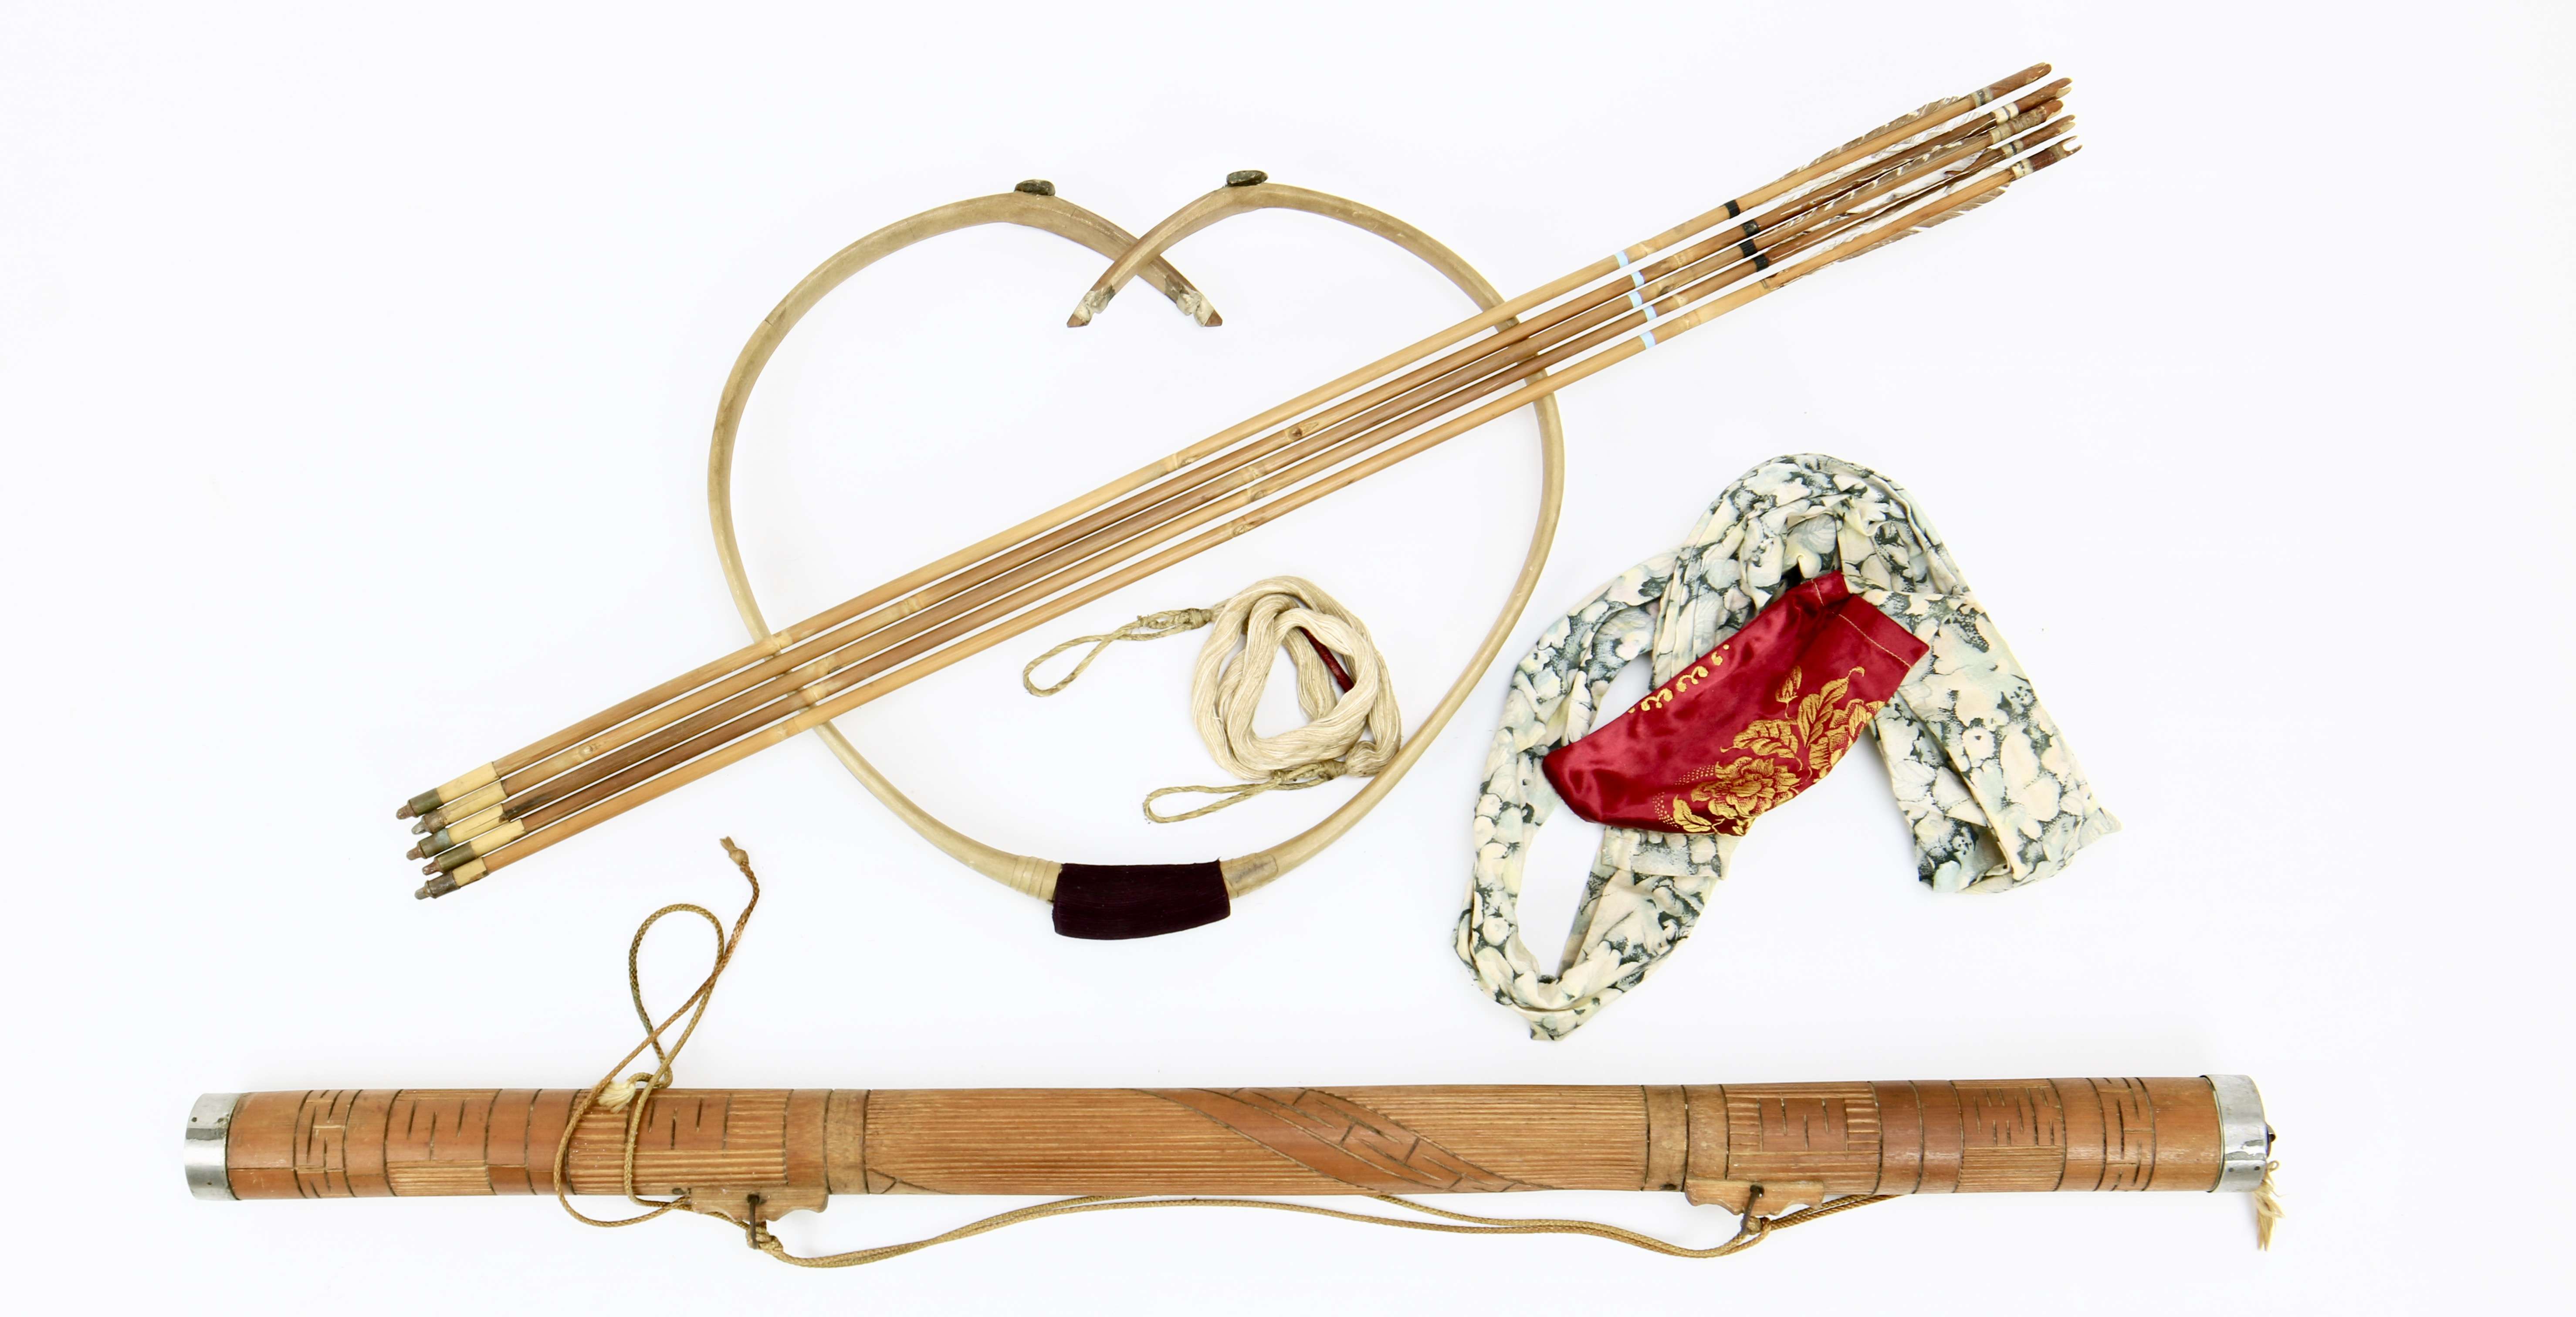 Korean archery set with hornbow, quivers, arrows, bow bag and string